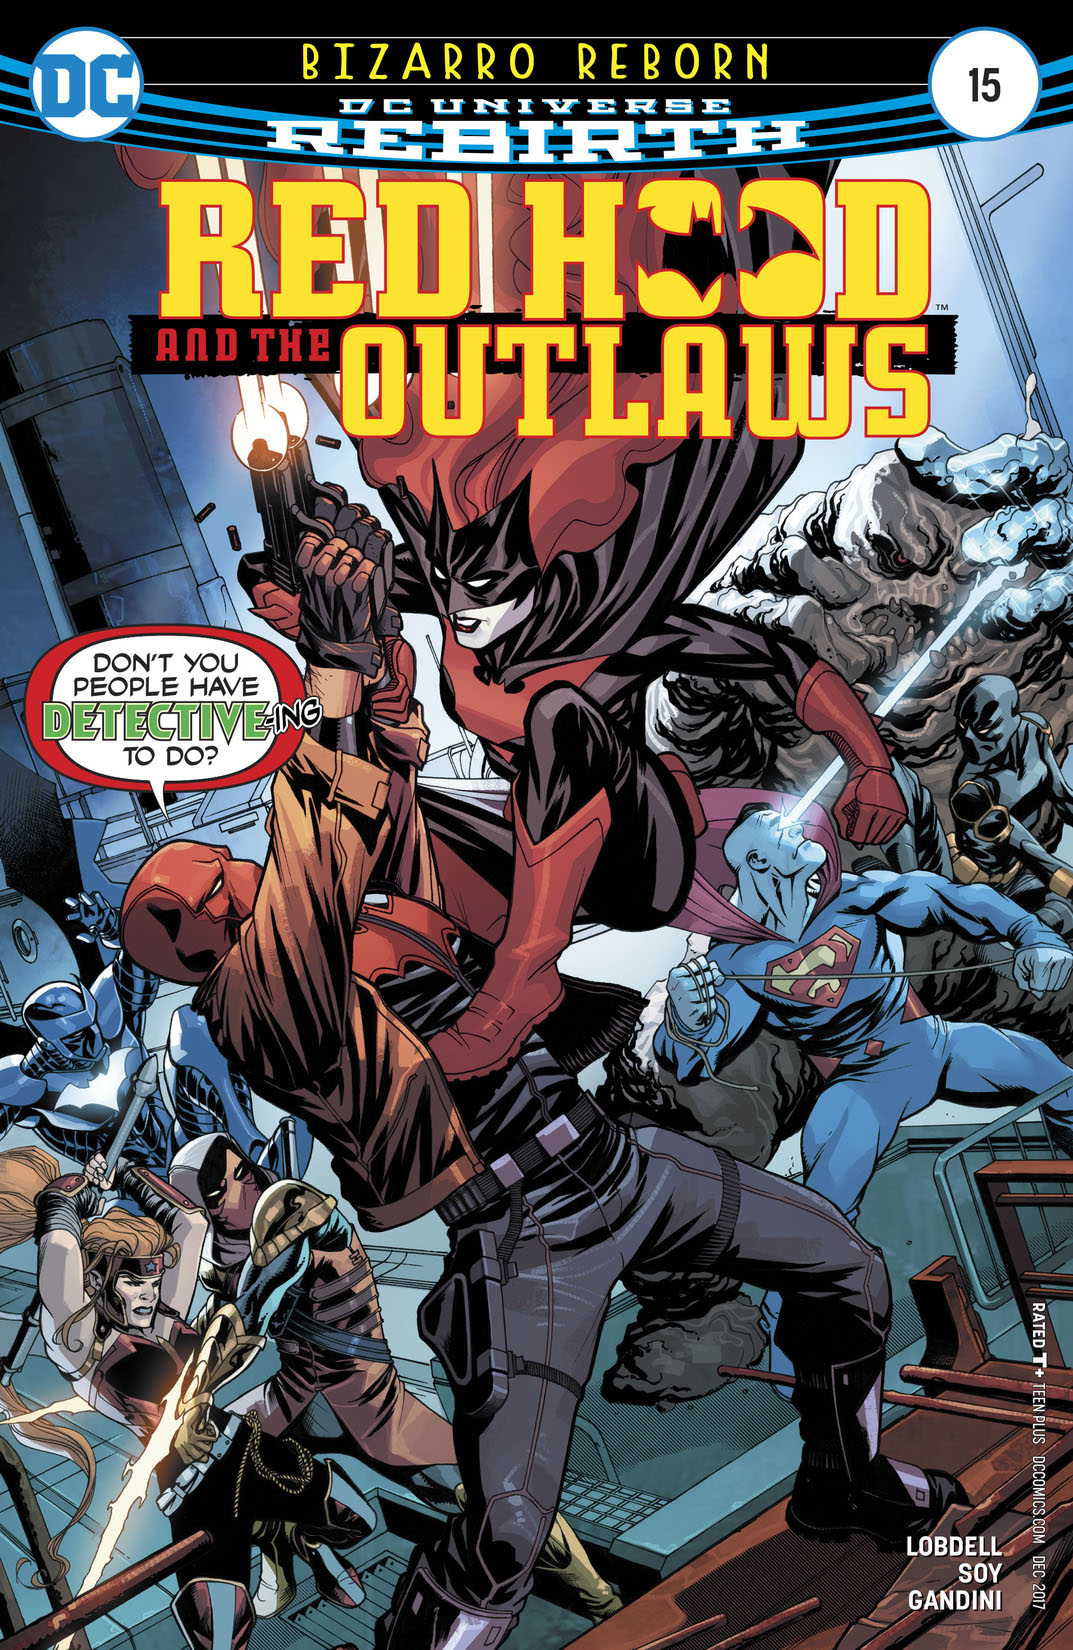 Red Hood and the Outlaws (2016-) #15 preview images